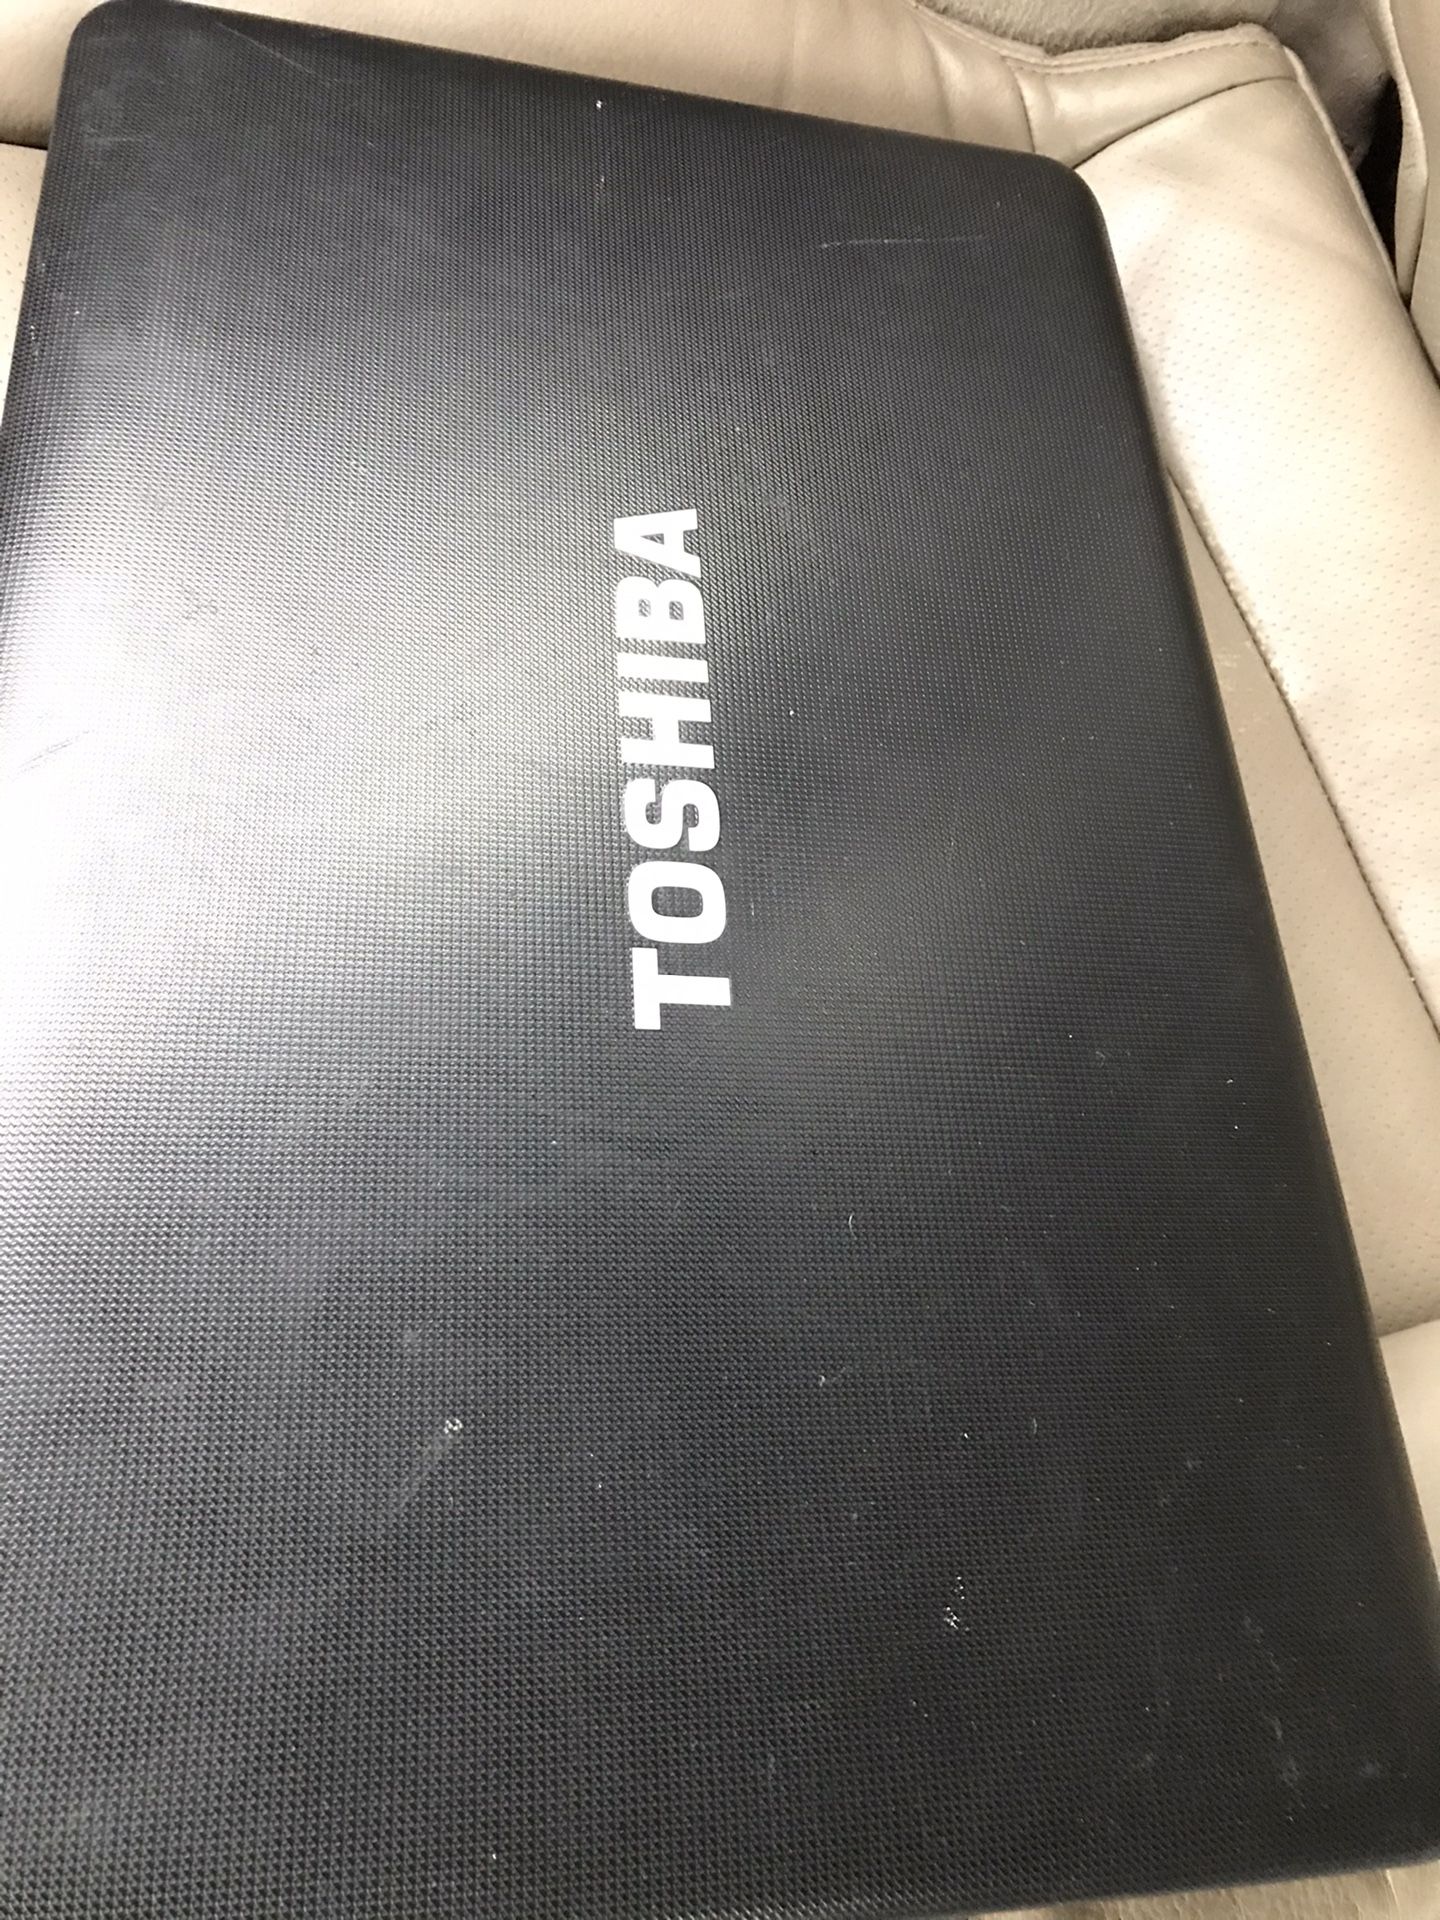 Toshiba Laptop 💻 (does not have charging cord)